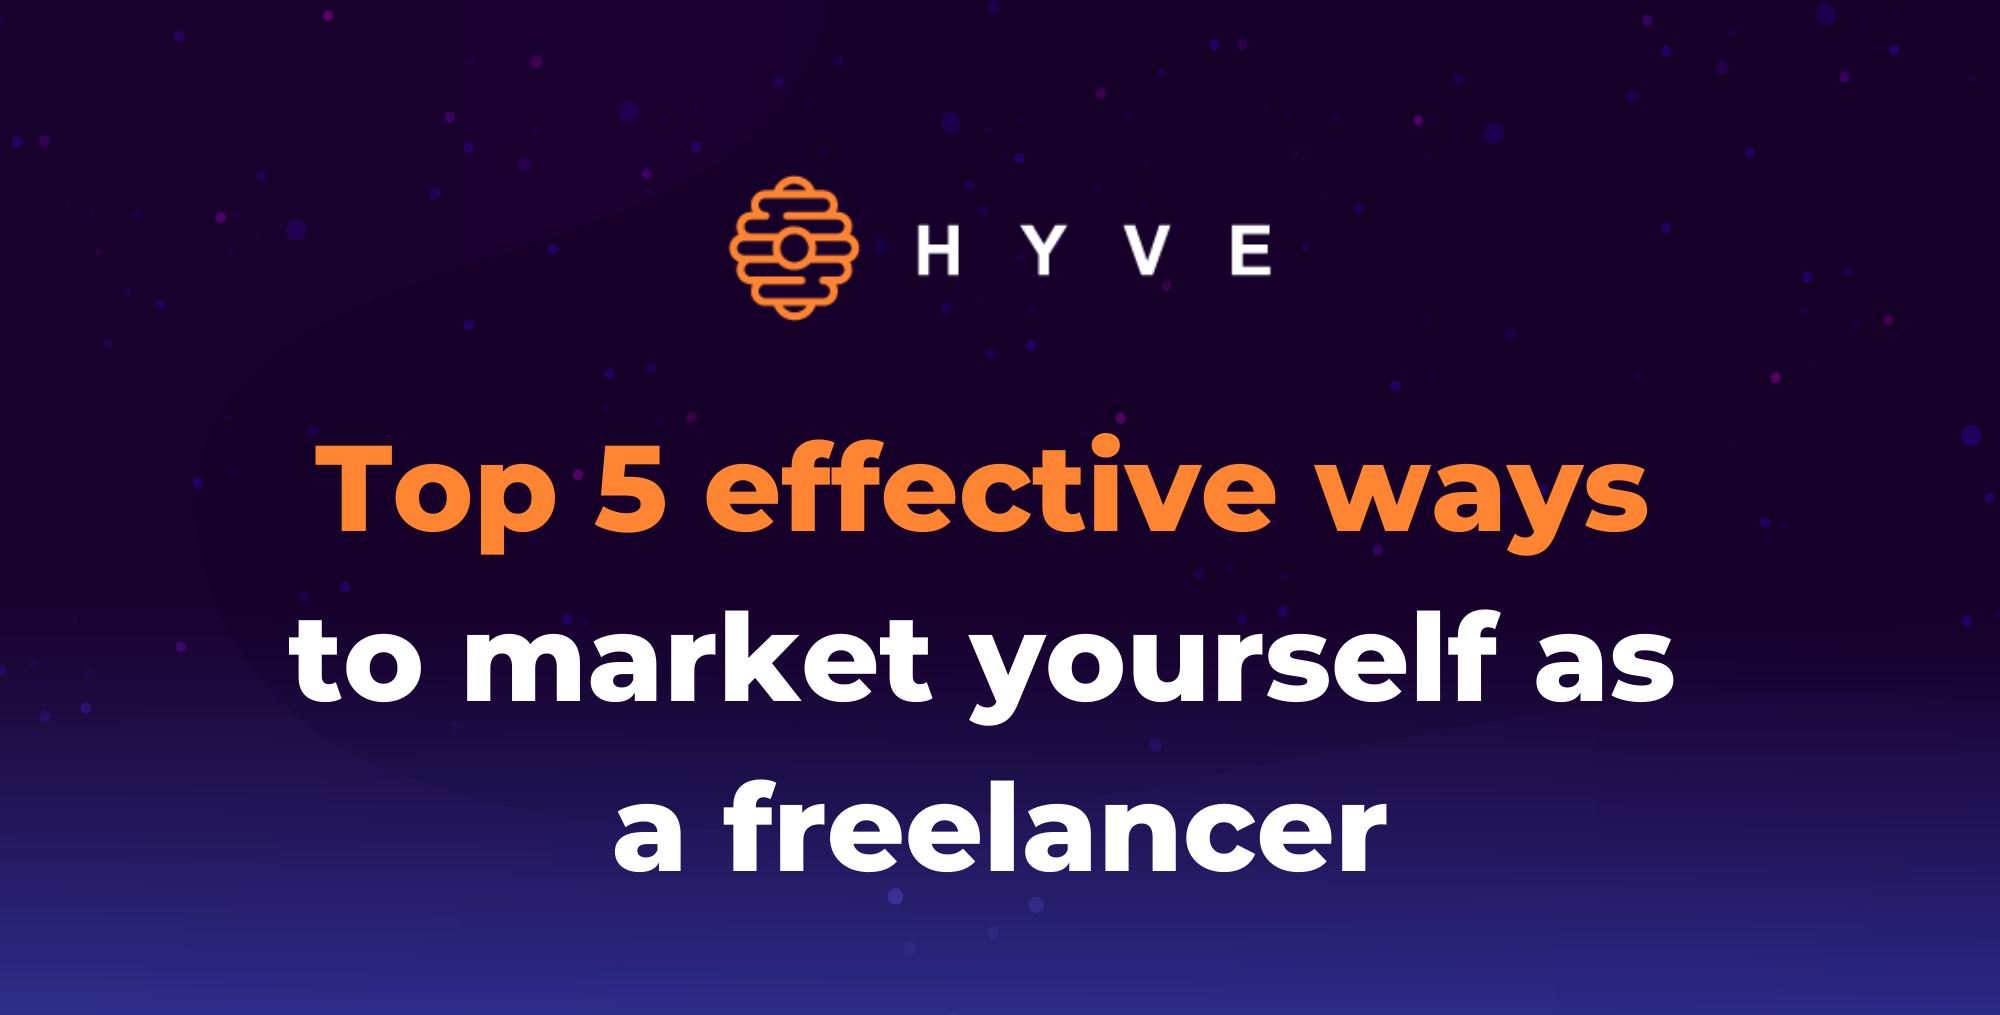 Top 5 effective ways to market yourself as a freelancer